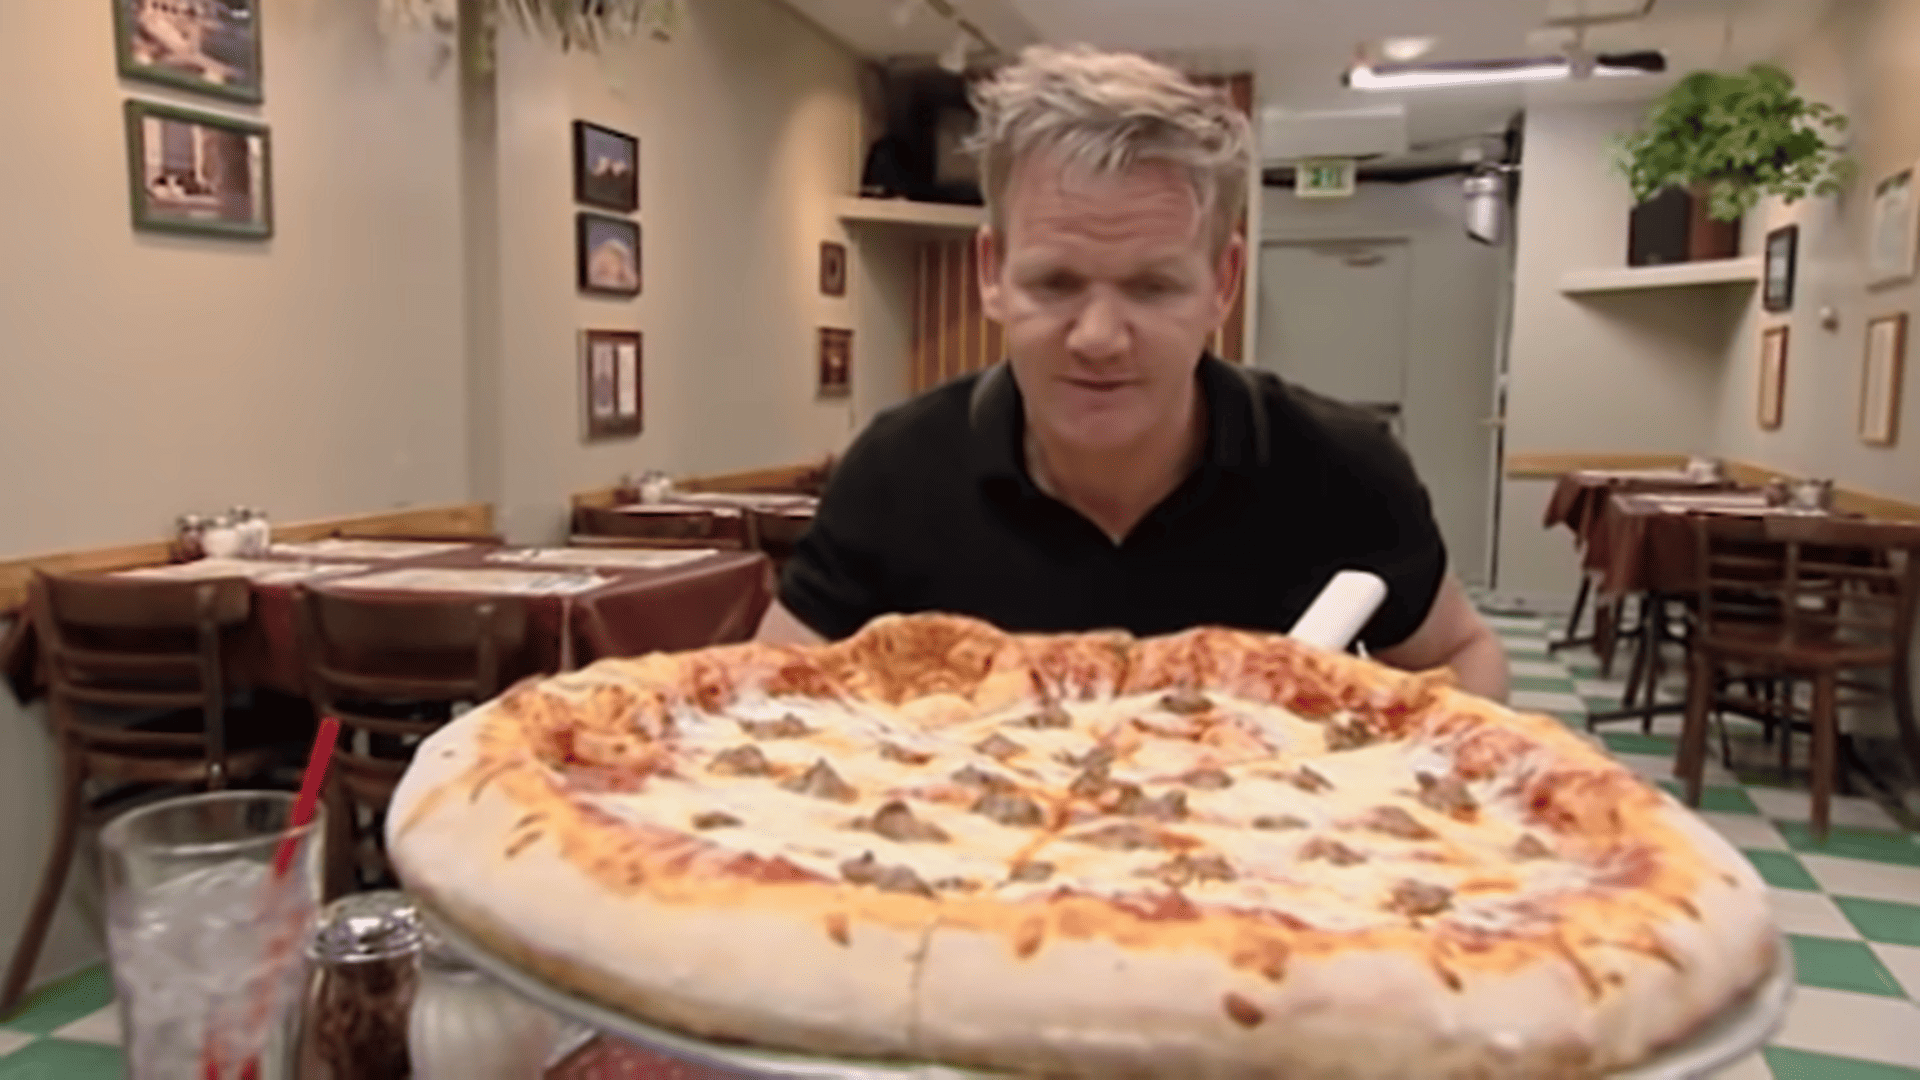 Gordon Ramsay looking at a thin-crust pizza from Pantaleone’s in this image from Studio Ramsay Global.